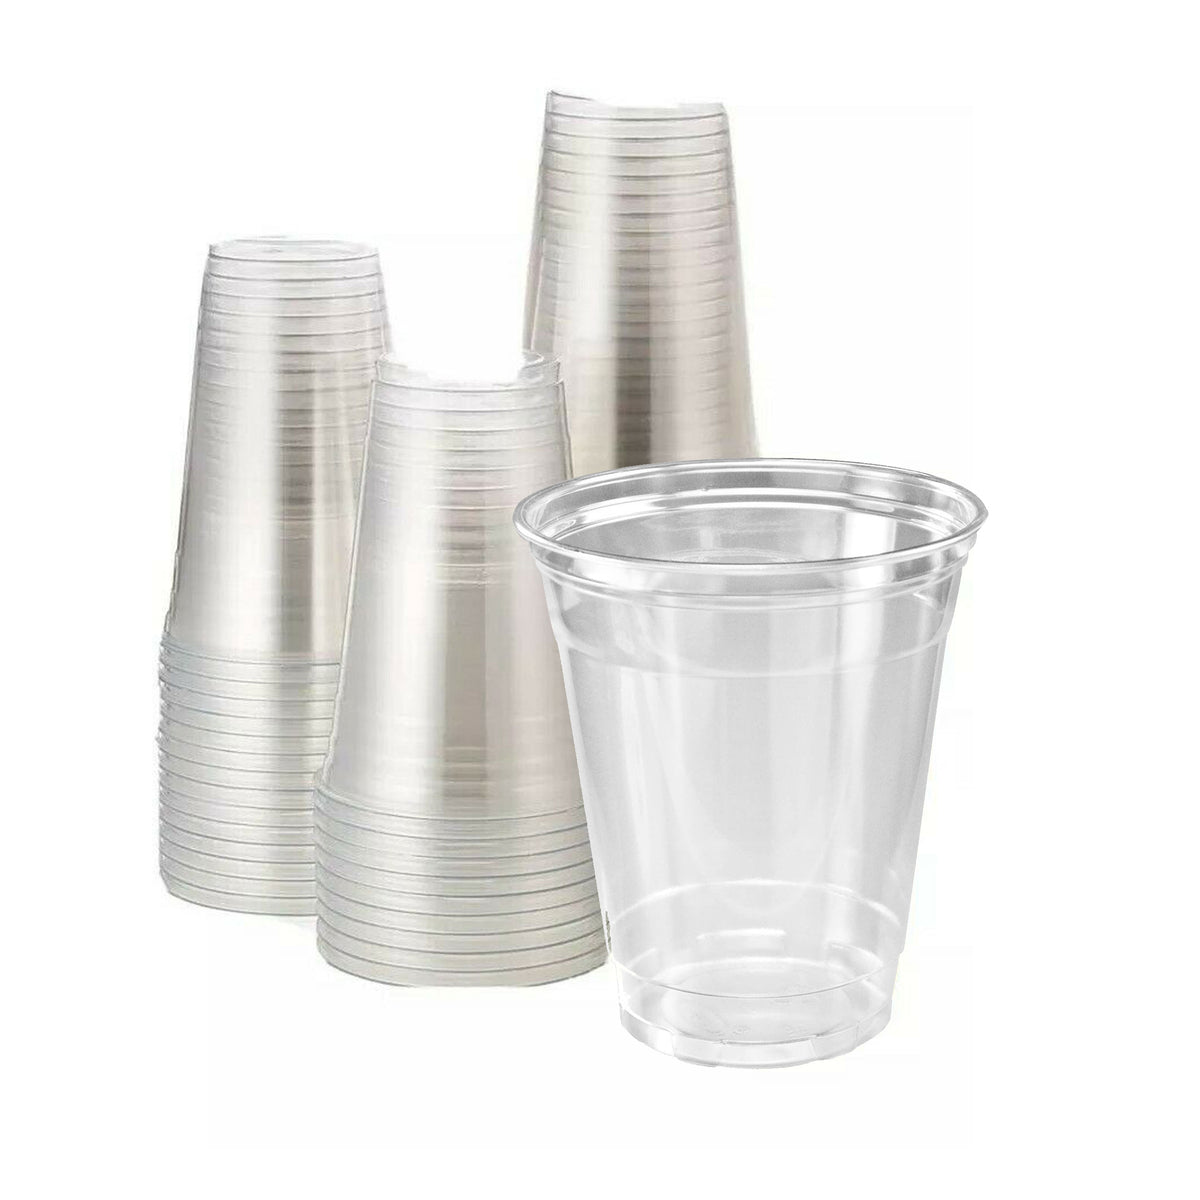 How plastic cups are made?